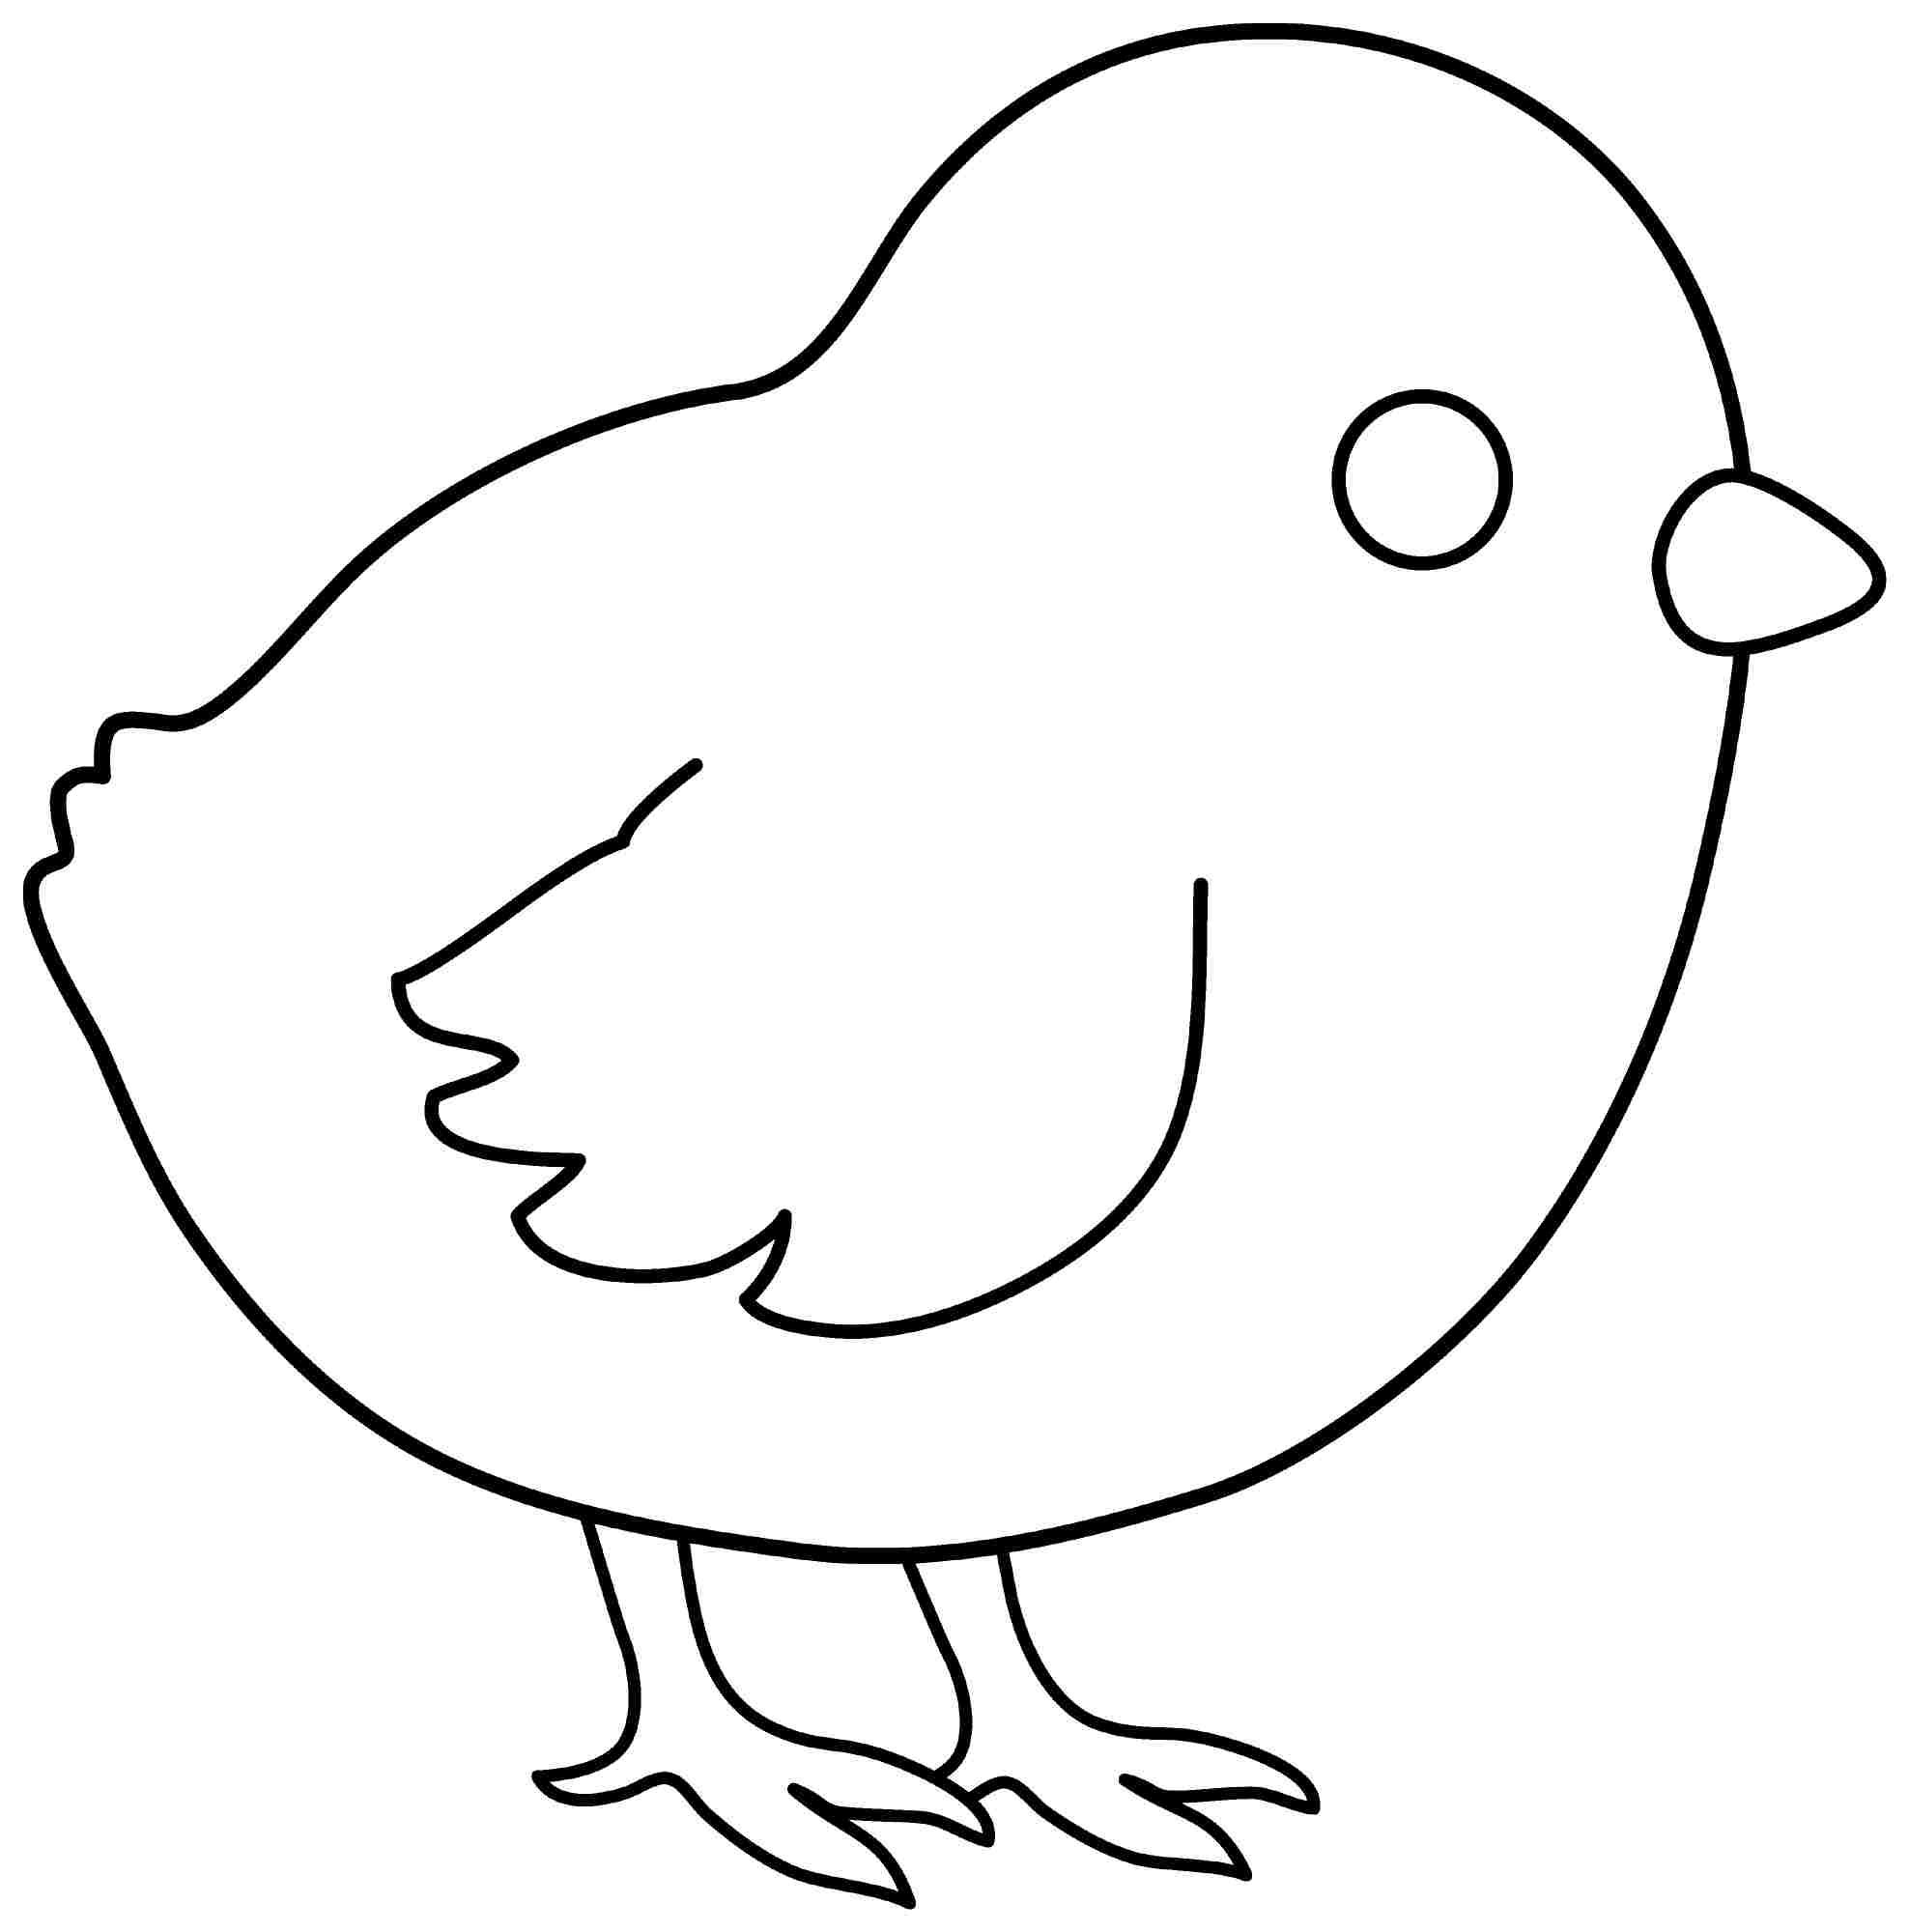 7-best-images-of-printable-chick-and-chicken-baby-chick-outline-template-preschool-chicken